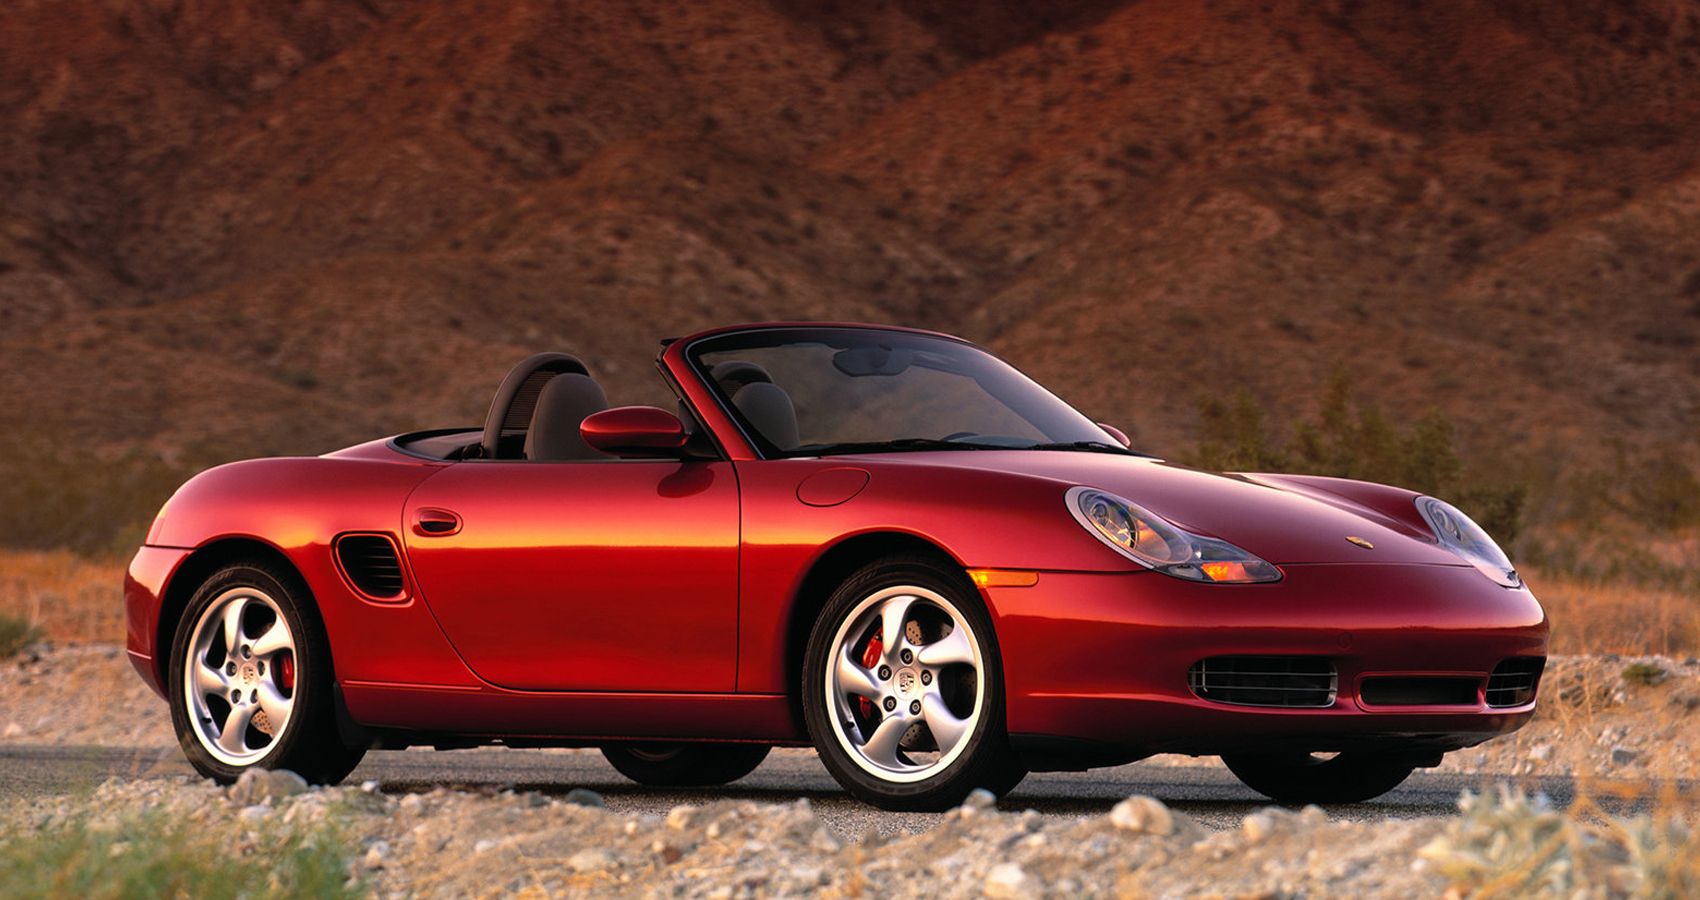 Front 3/4 view of a red 2002 Boxster S